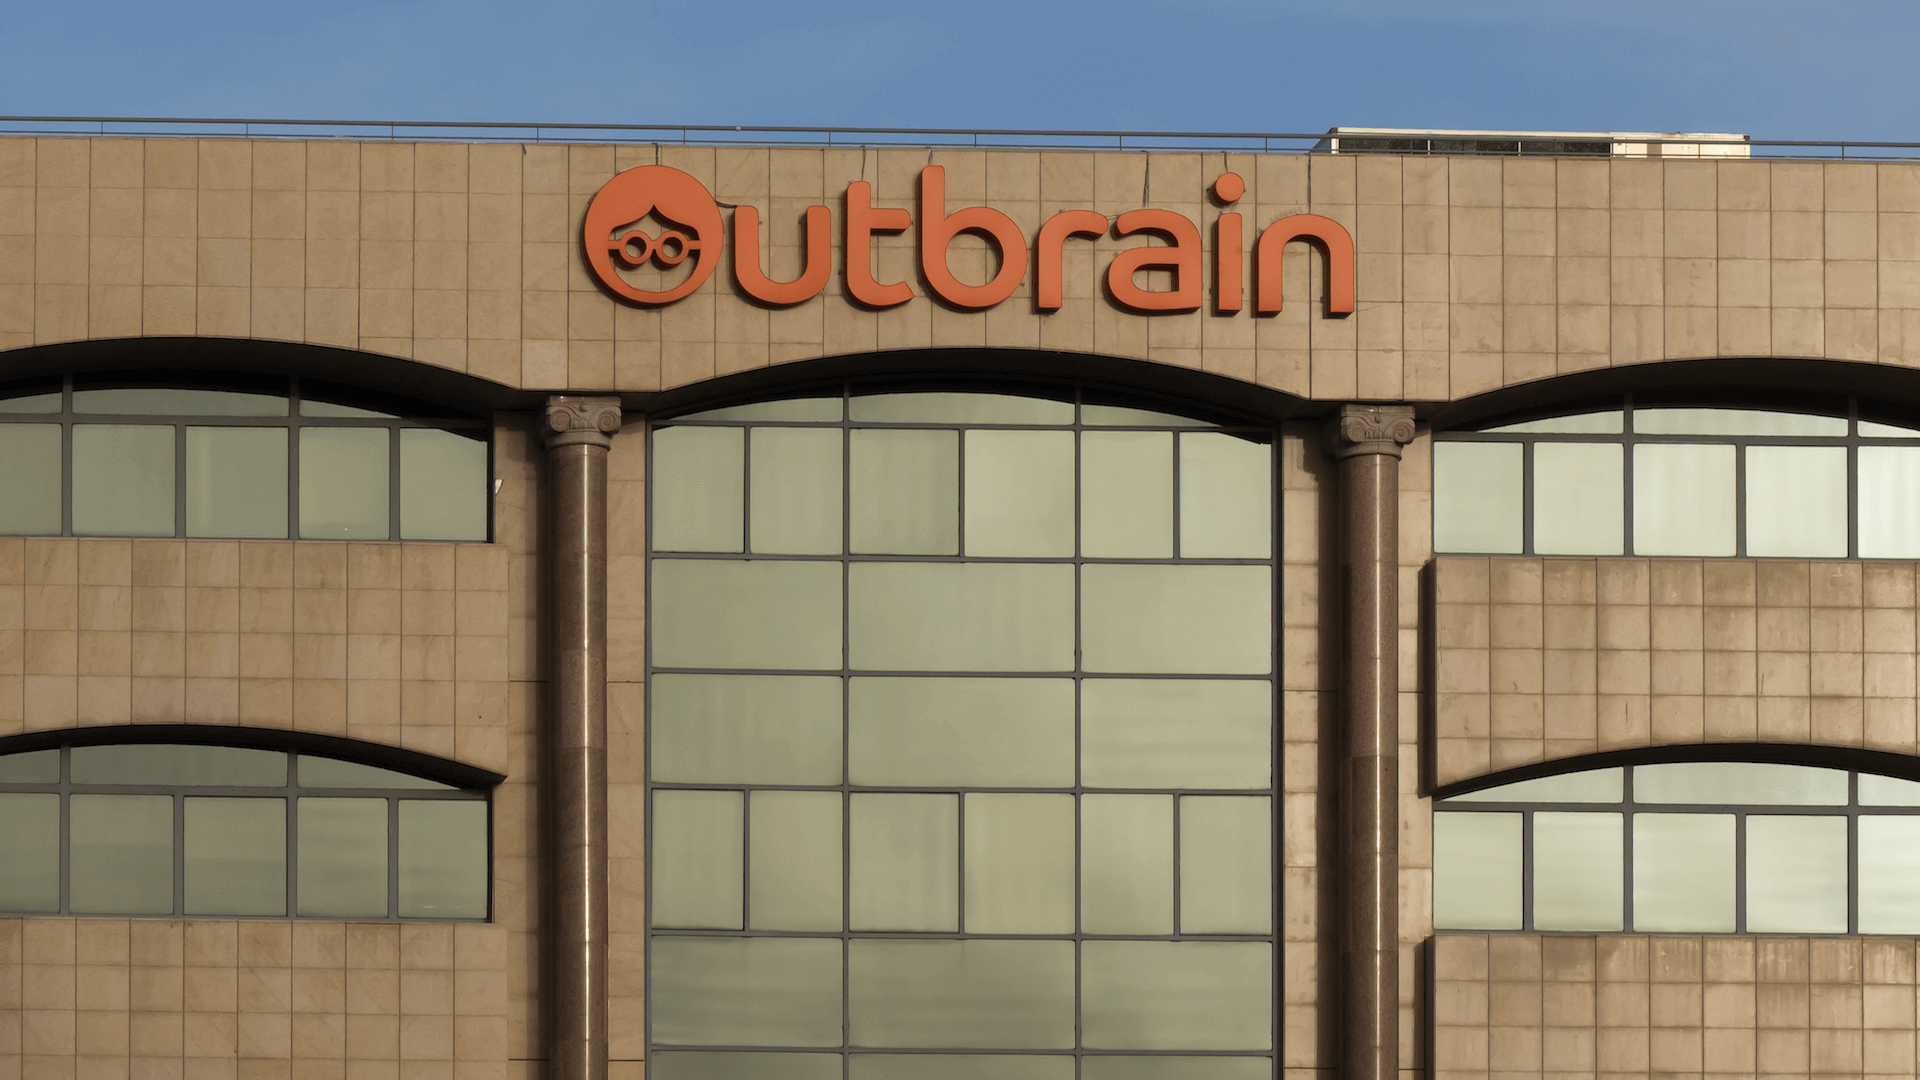 Outbrain Building